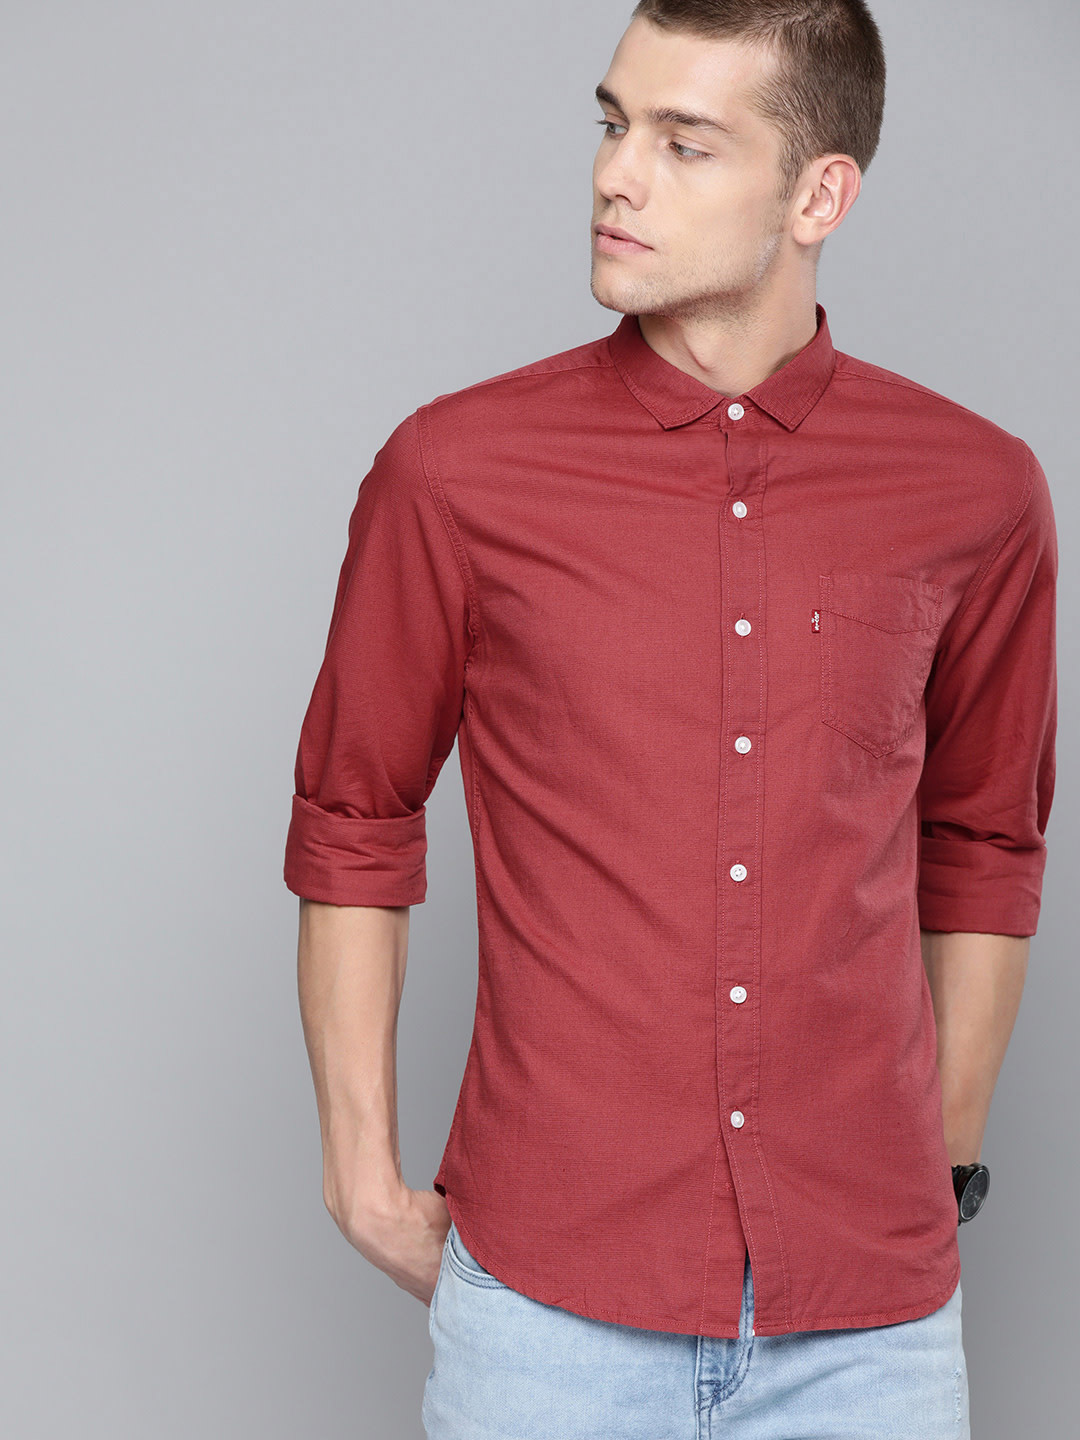 levis party wear shirts